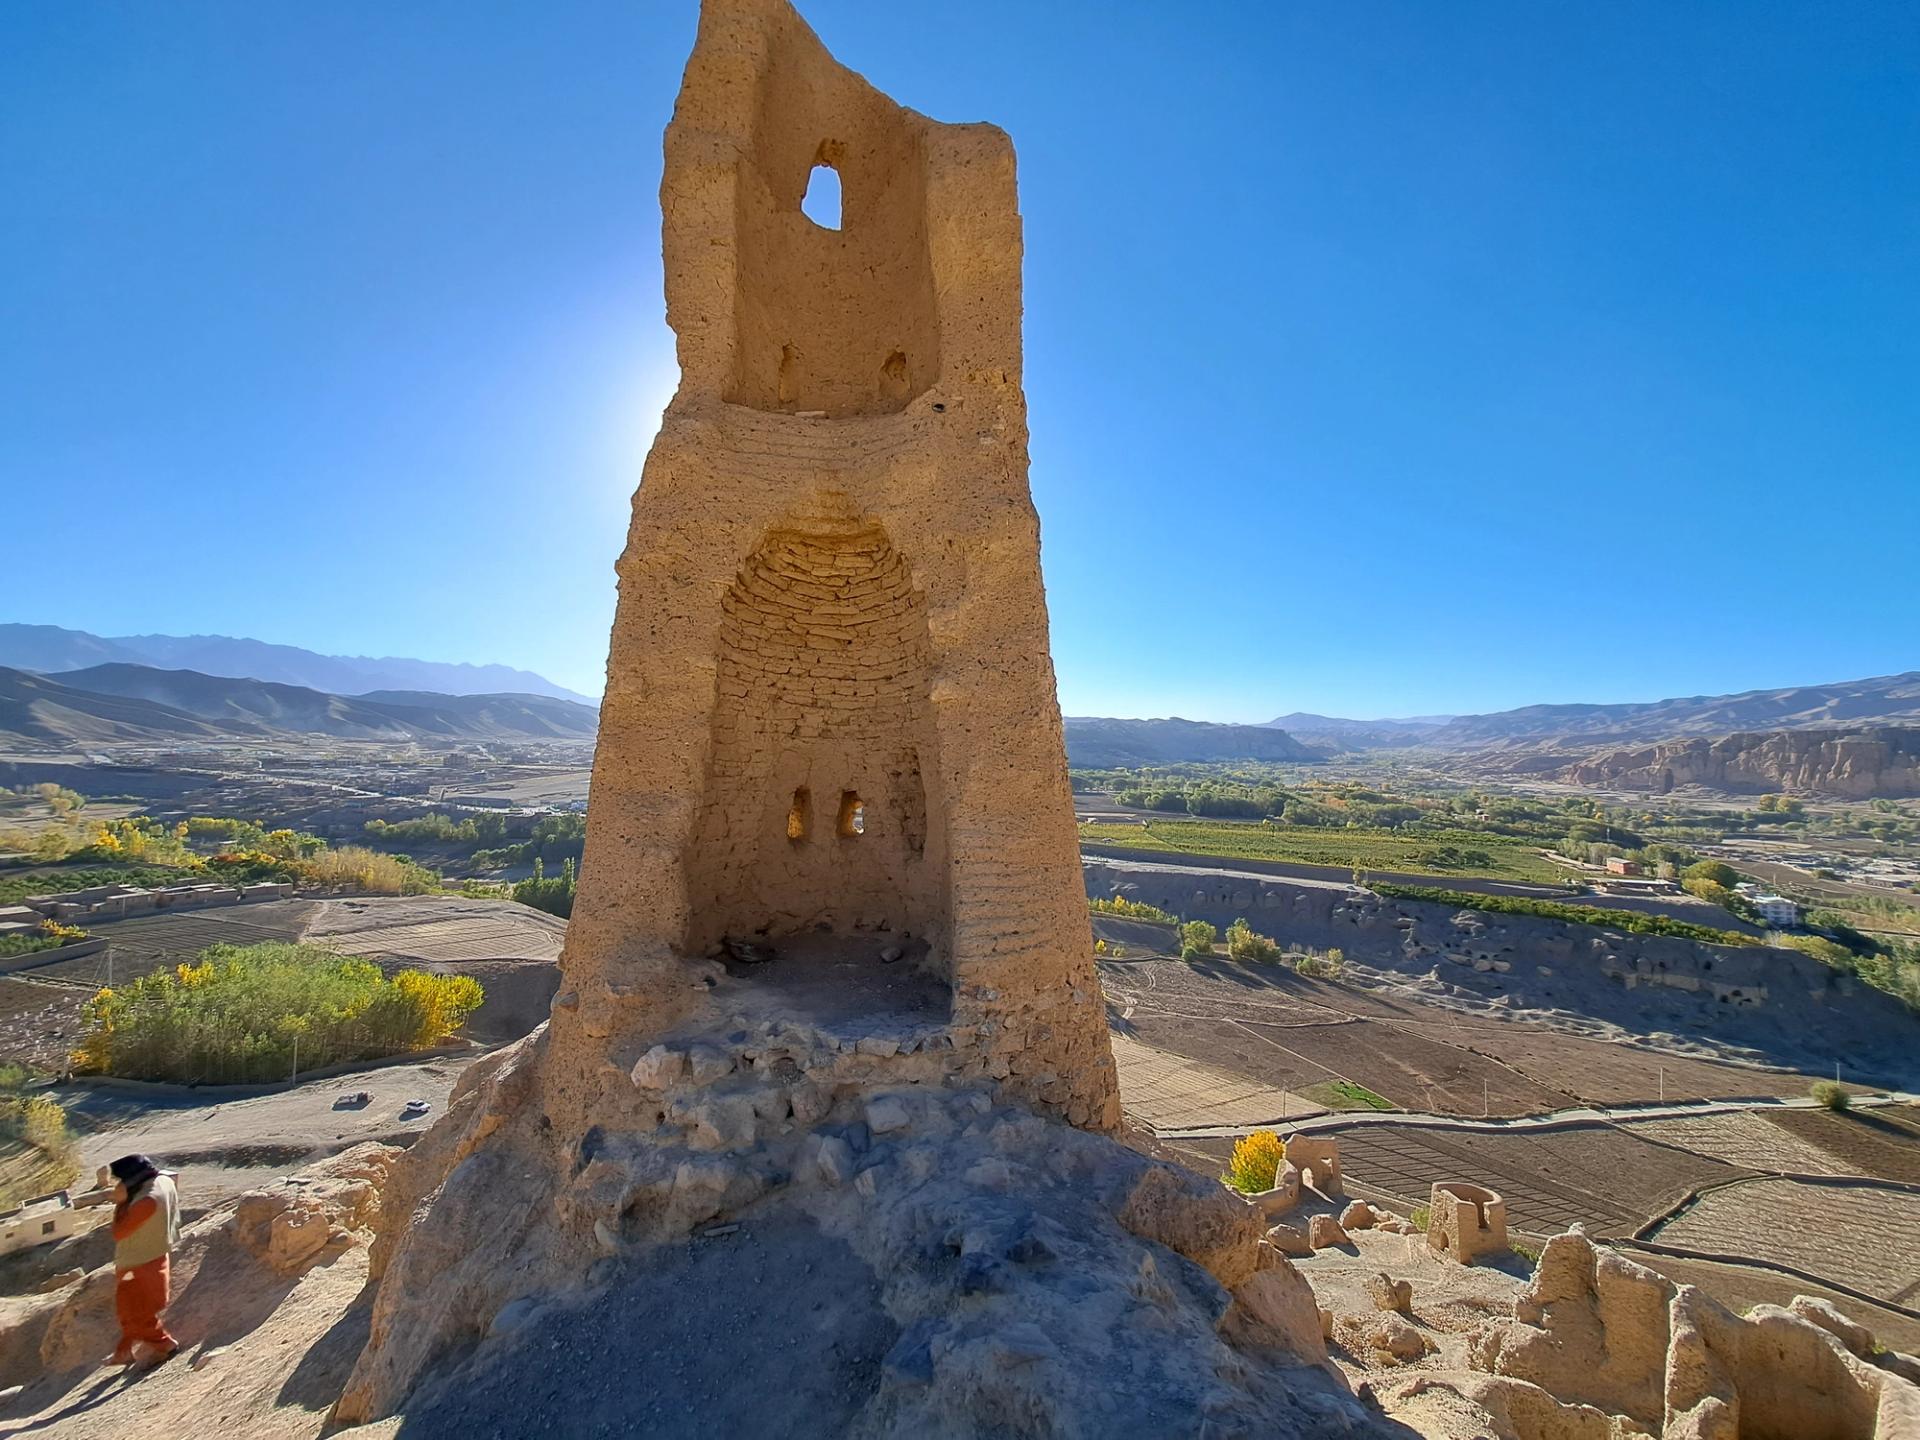 The sixth to tenth-century fortified citadel Shahr-e Gholghola is one of the eight sites registered by Unesco in Bamiyan, and is desperate need of conservation, according to Taliban officials Photo: Sarvy Geranpayeh